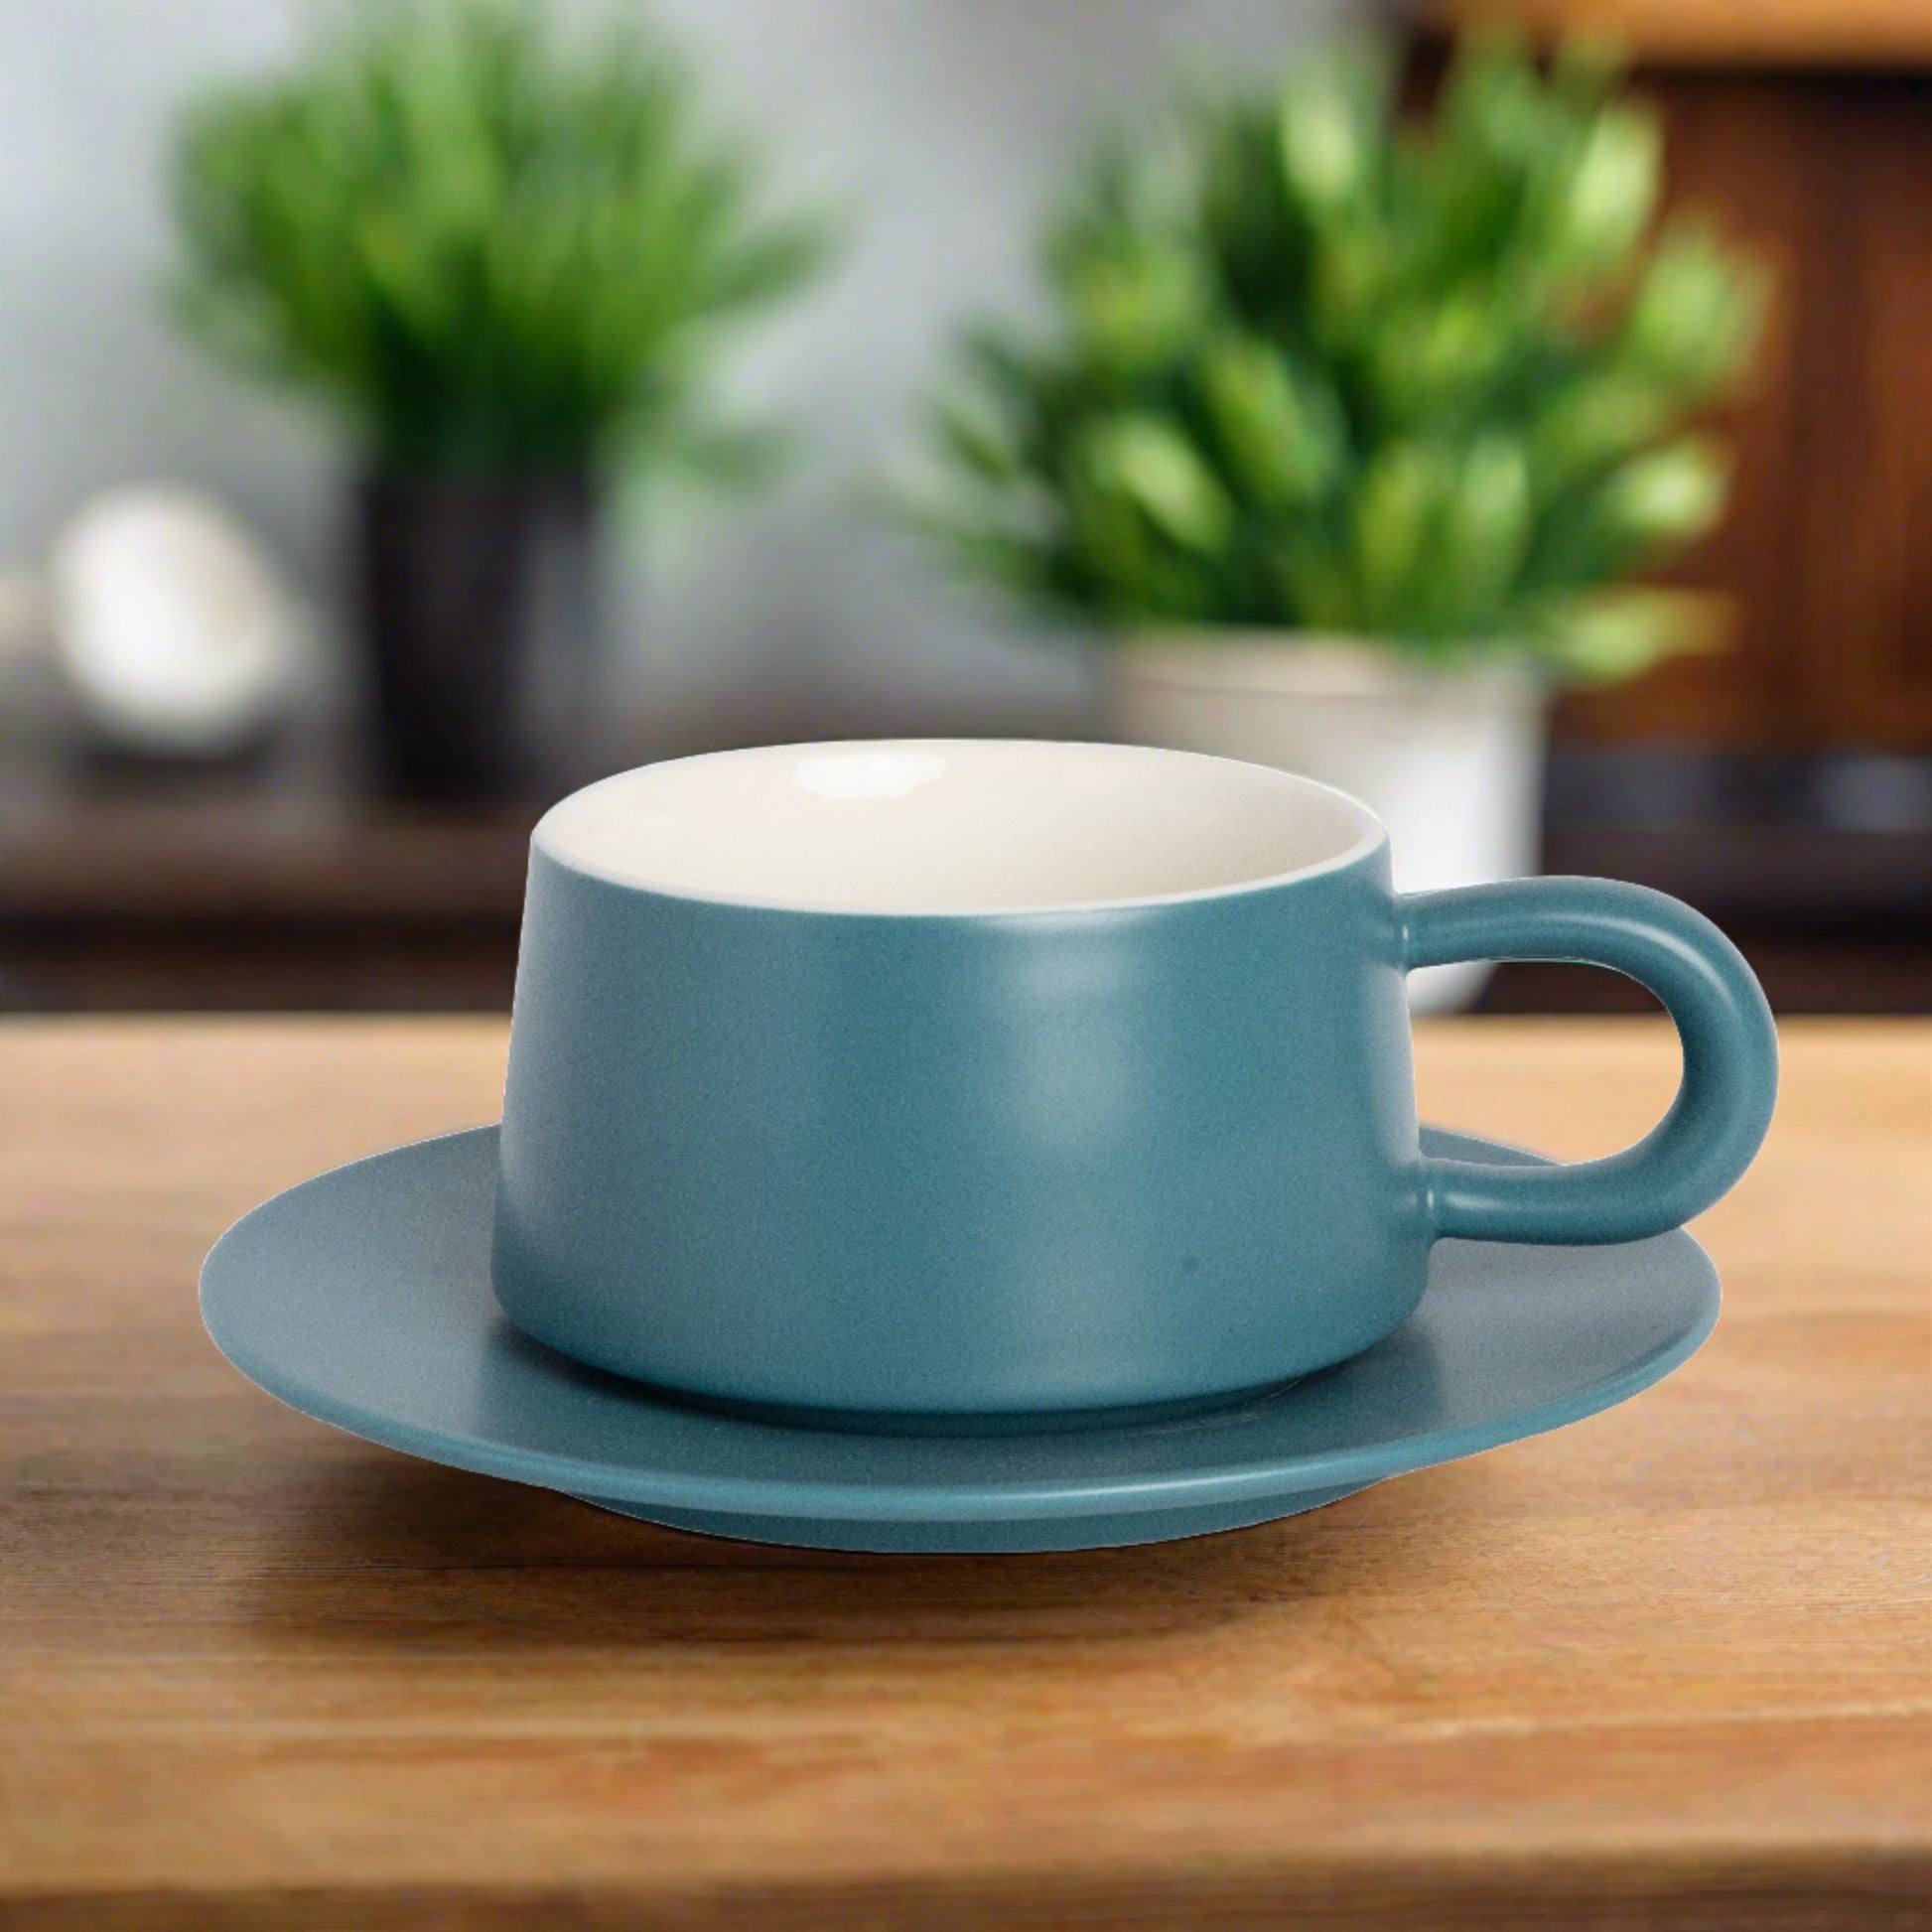 Ceramic cup/mug with saucer for your favorite beverages - stylish and functional.